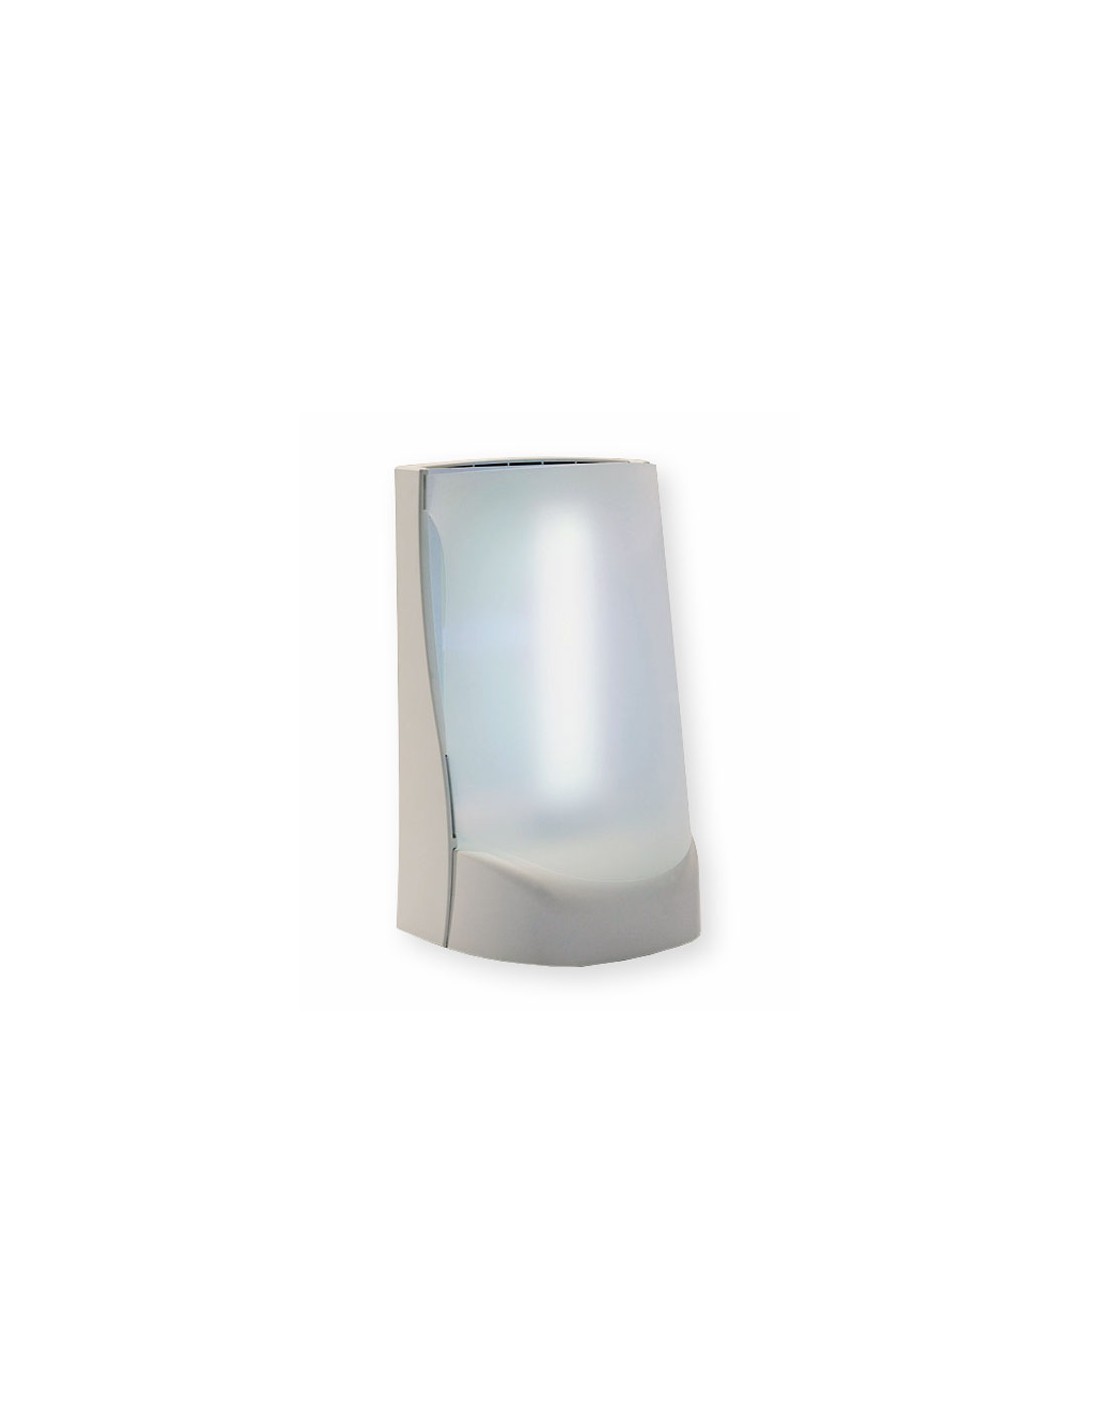 Synergetic Flypod Decorative Flylight Questions & Answers